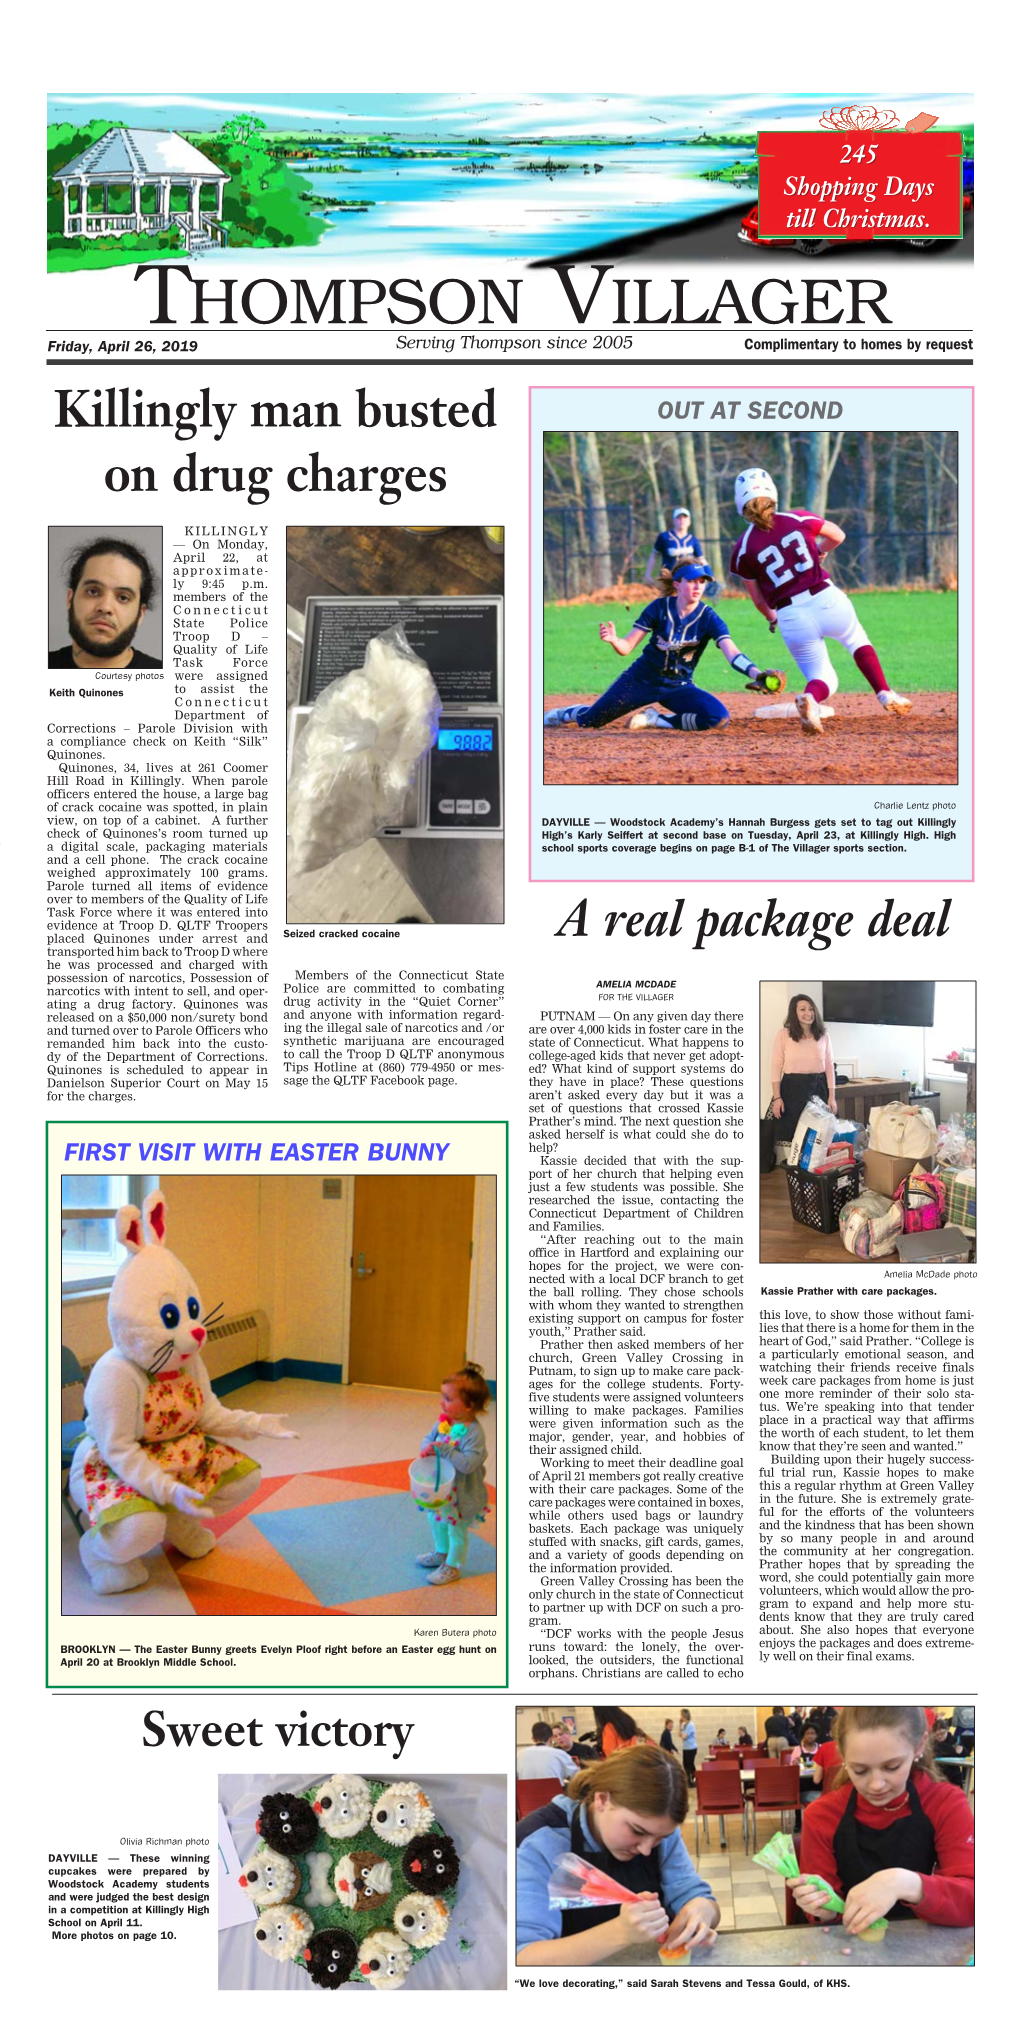 Thompson Villager Friday, April 26, 2019 Serving Thompson Since 2005 Complimentary to Homes by Request